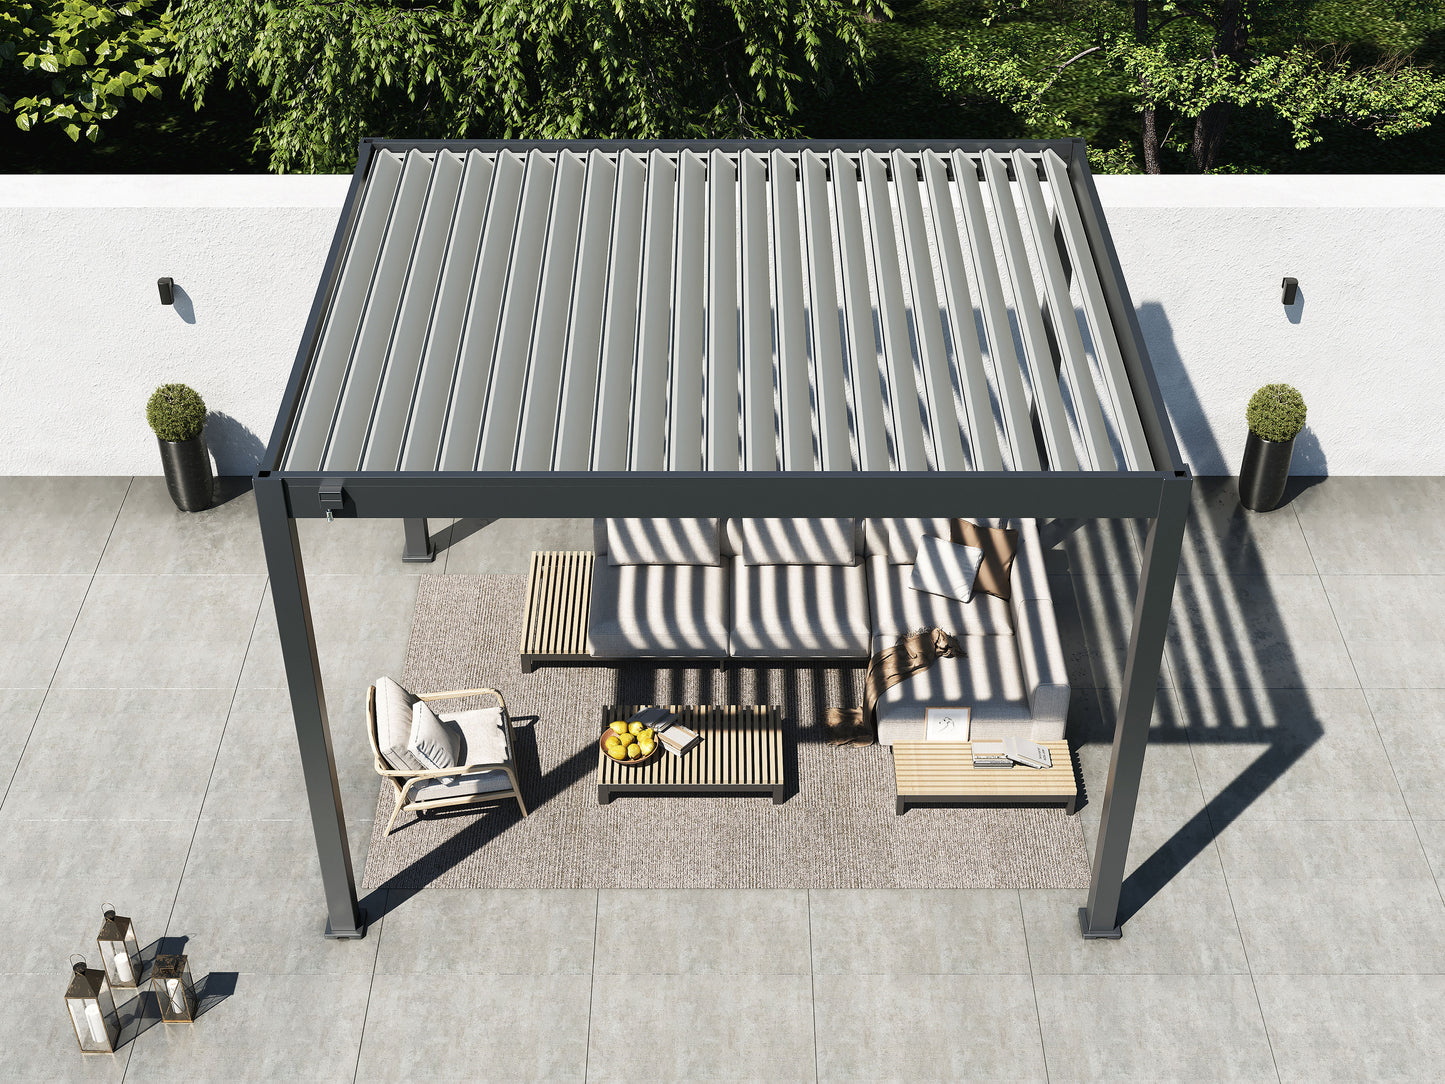 Bird's eye view of the Lugano's louvered roof